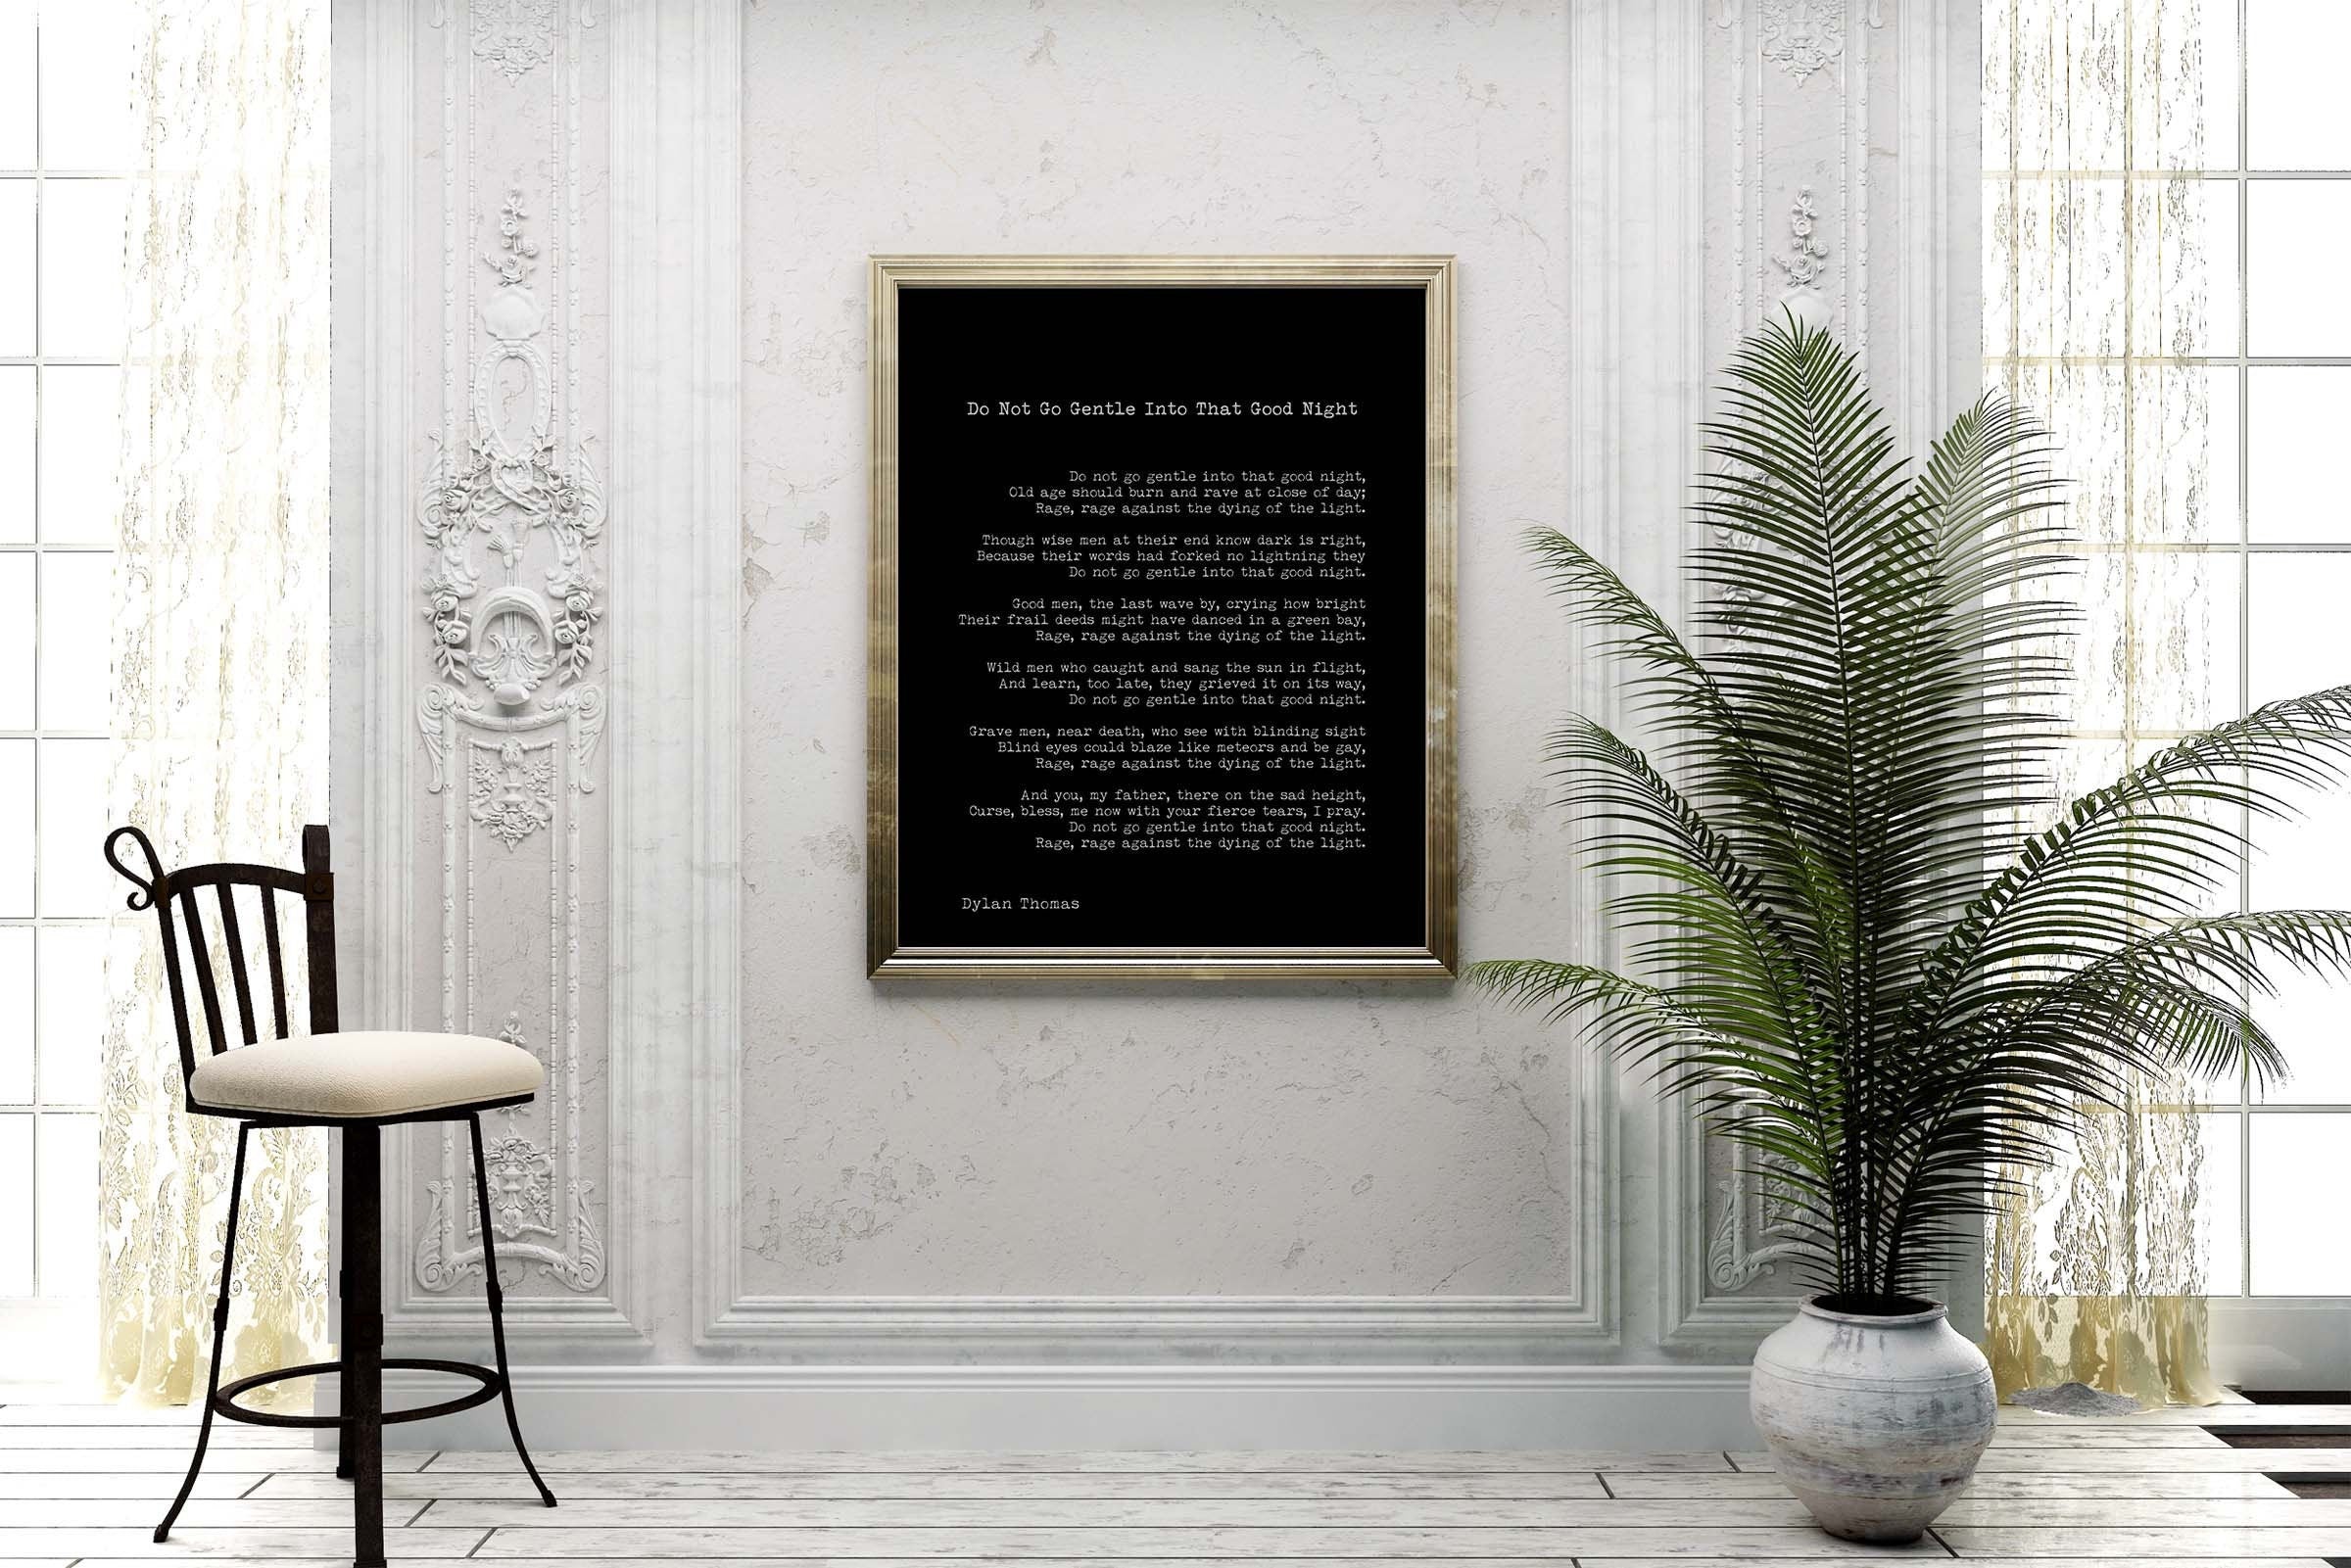 Large Dylan Thomas Poem Print, Do Not Go Gentle Poetry Poster unframed in Black & White for Home Wall Decor